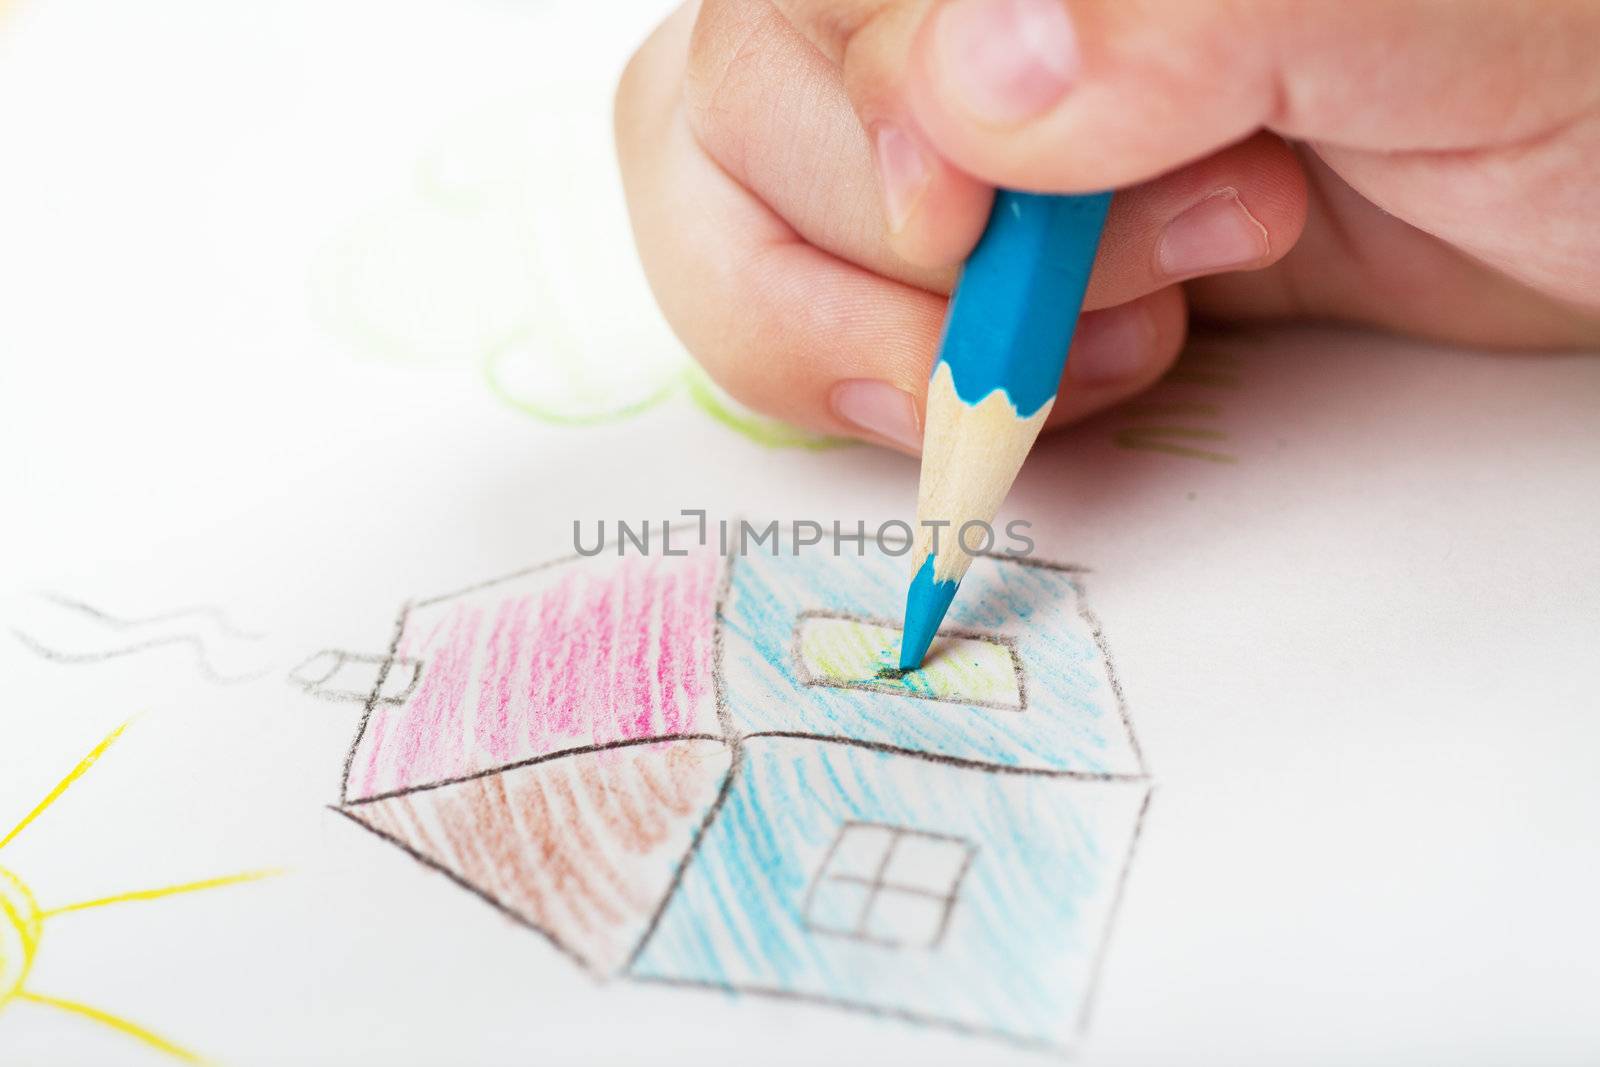 Child's hand drawing a house with blue pen